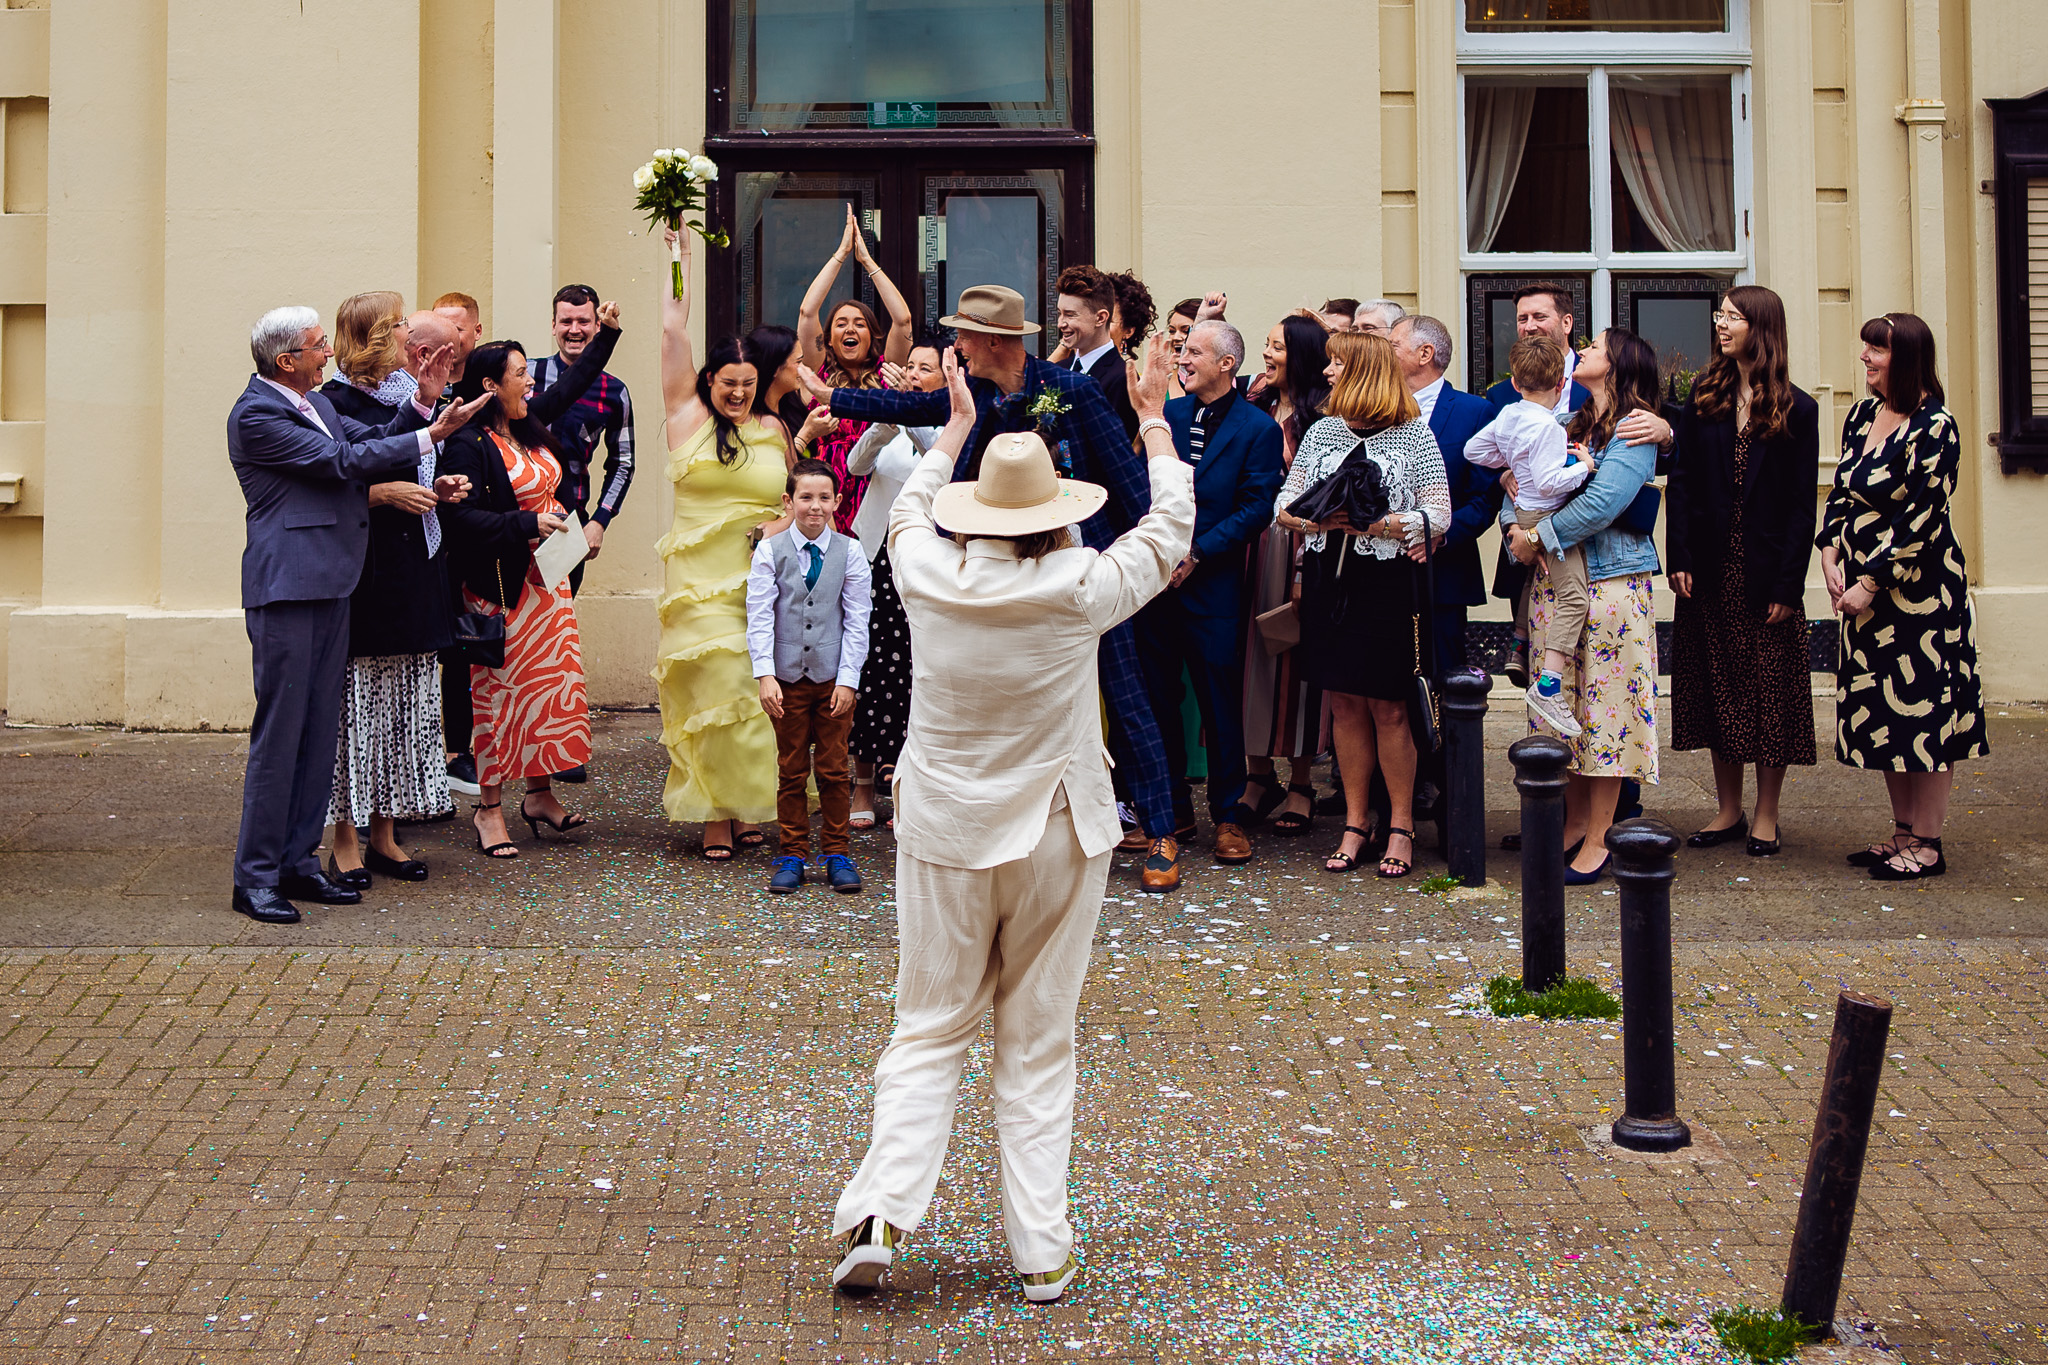 Woman in yellow dress has caught the wedding bouquet as guests cheer outside of Brighton town Hall.